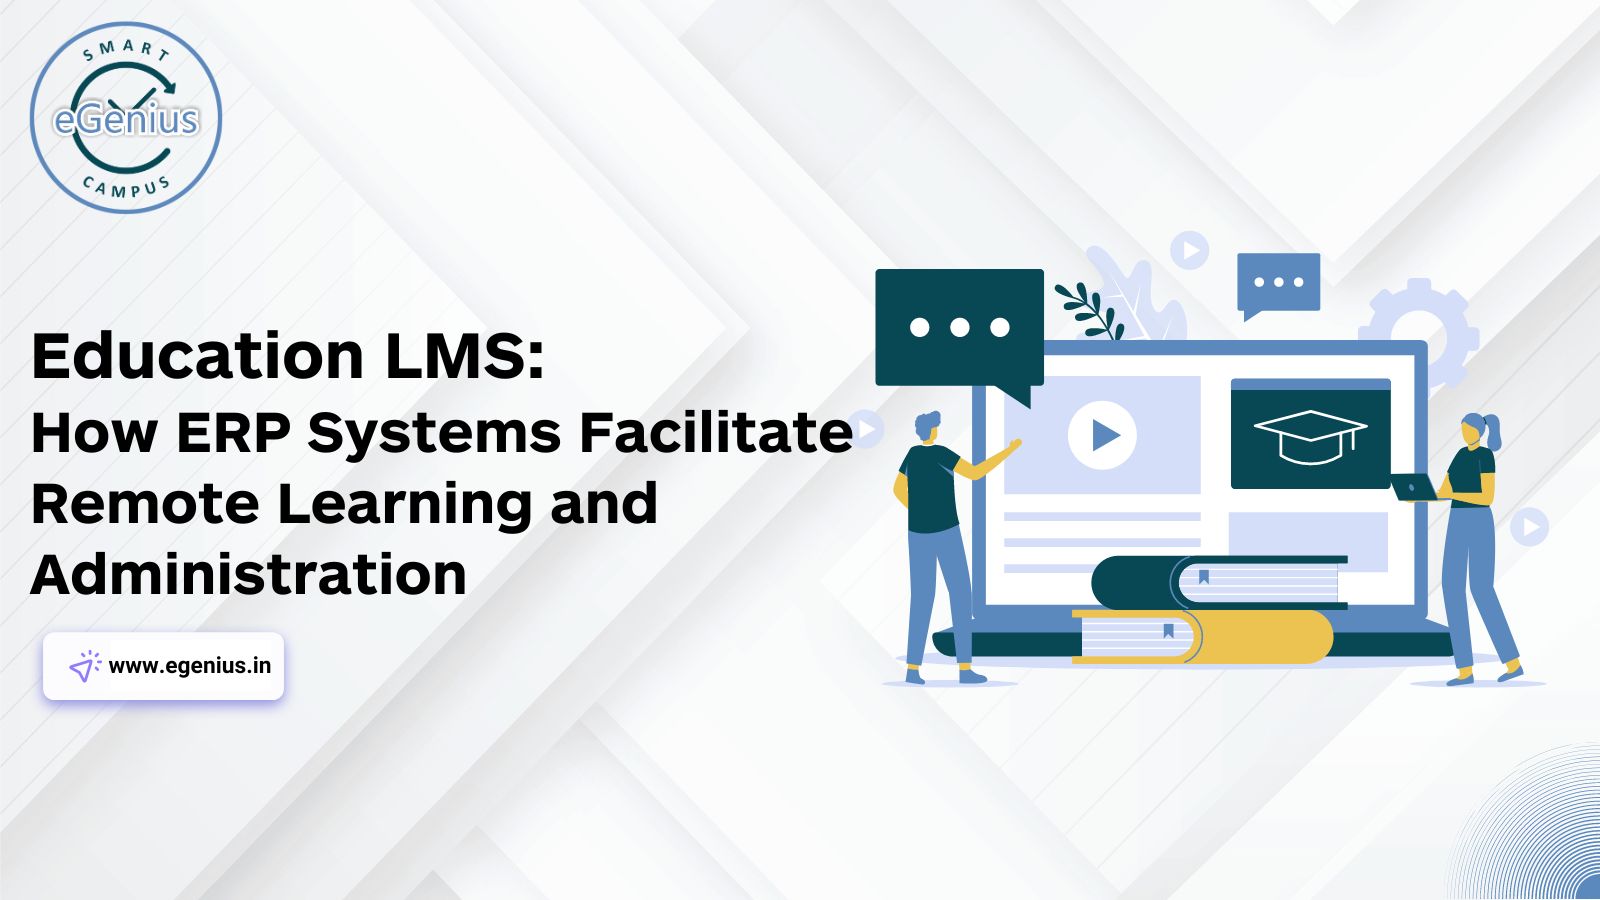 Education LMS: How ERP Systems Facilitate Remote Learning and Administration 